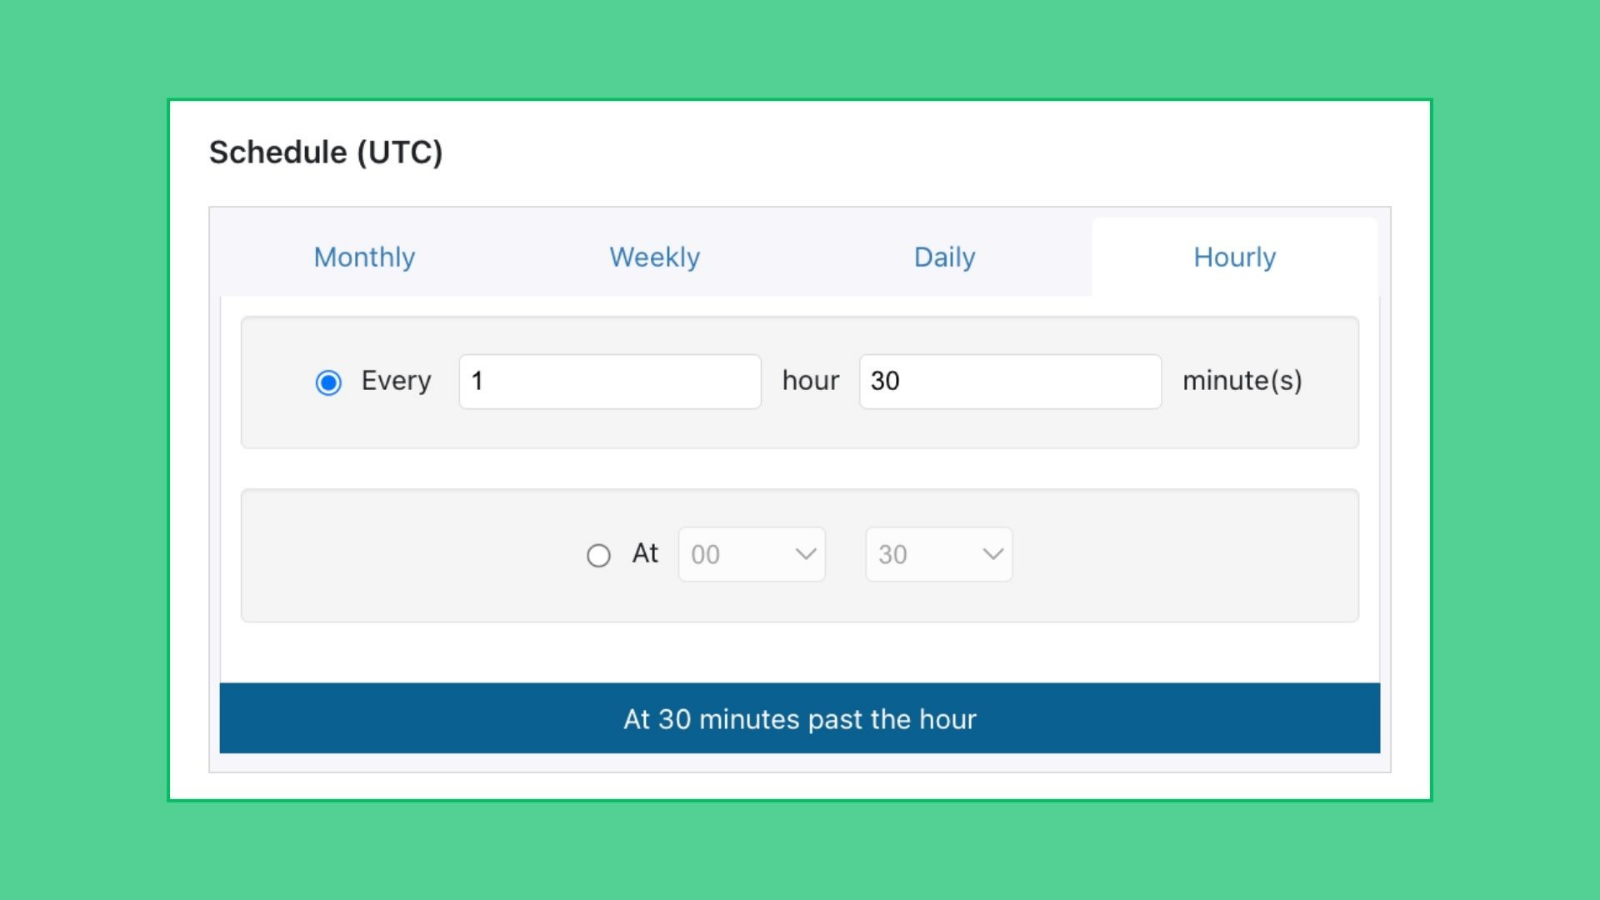 granular scheduling capabilities from hourly to monthly